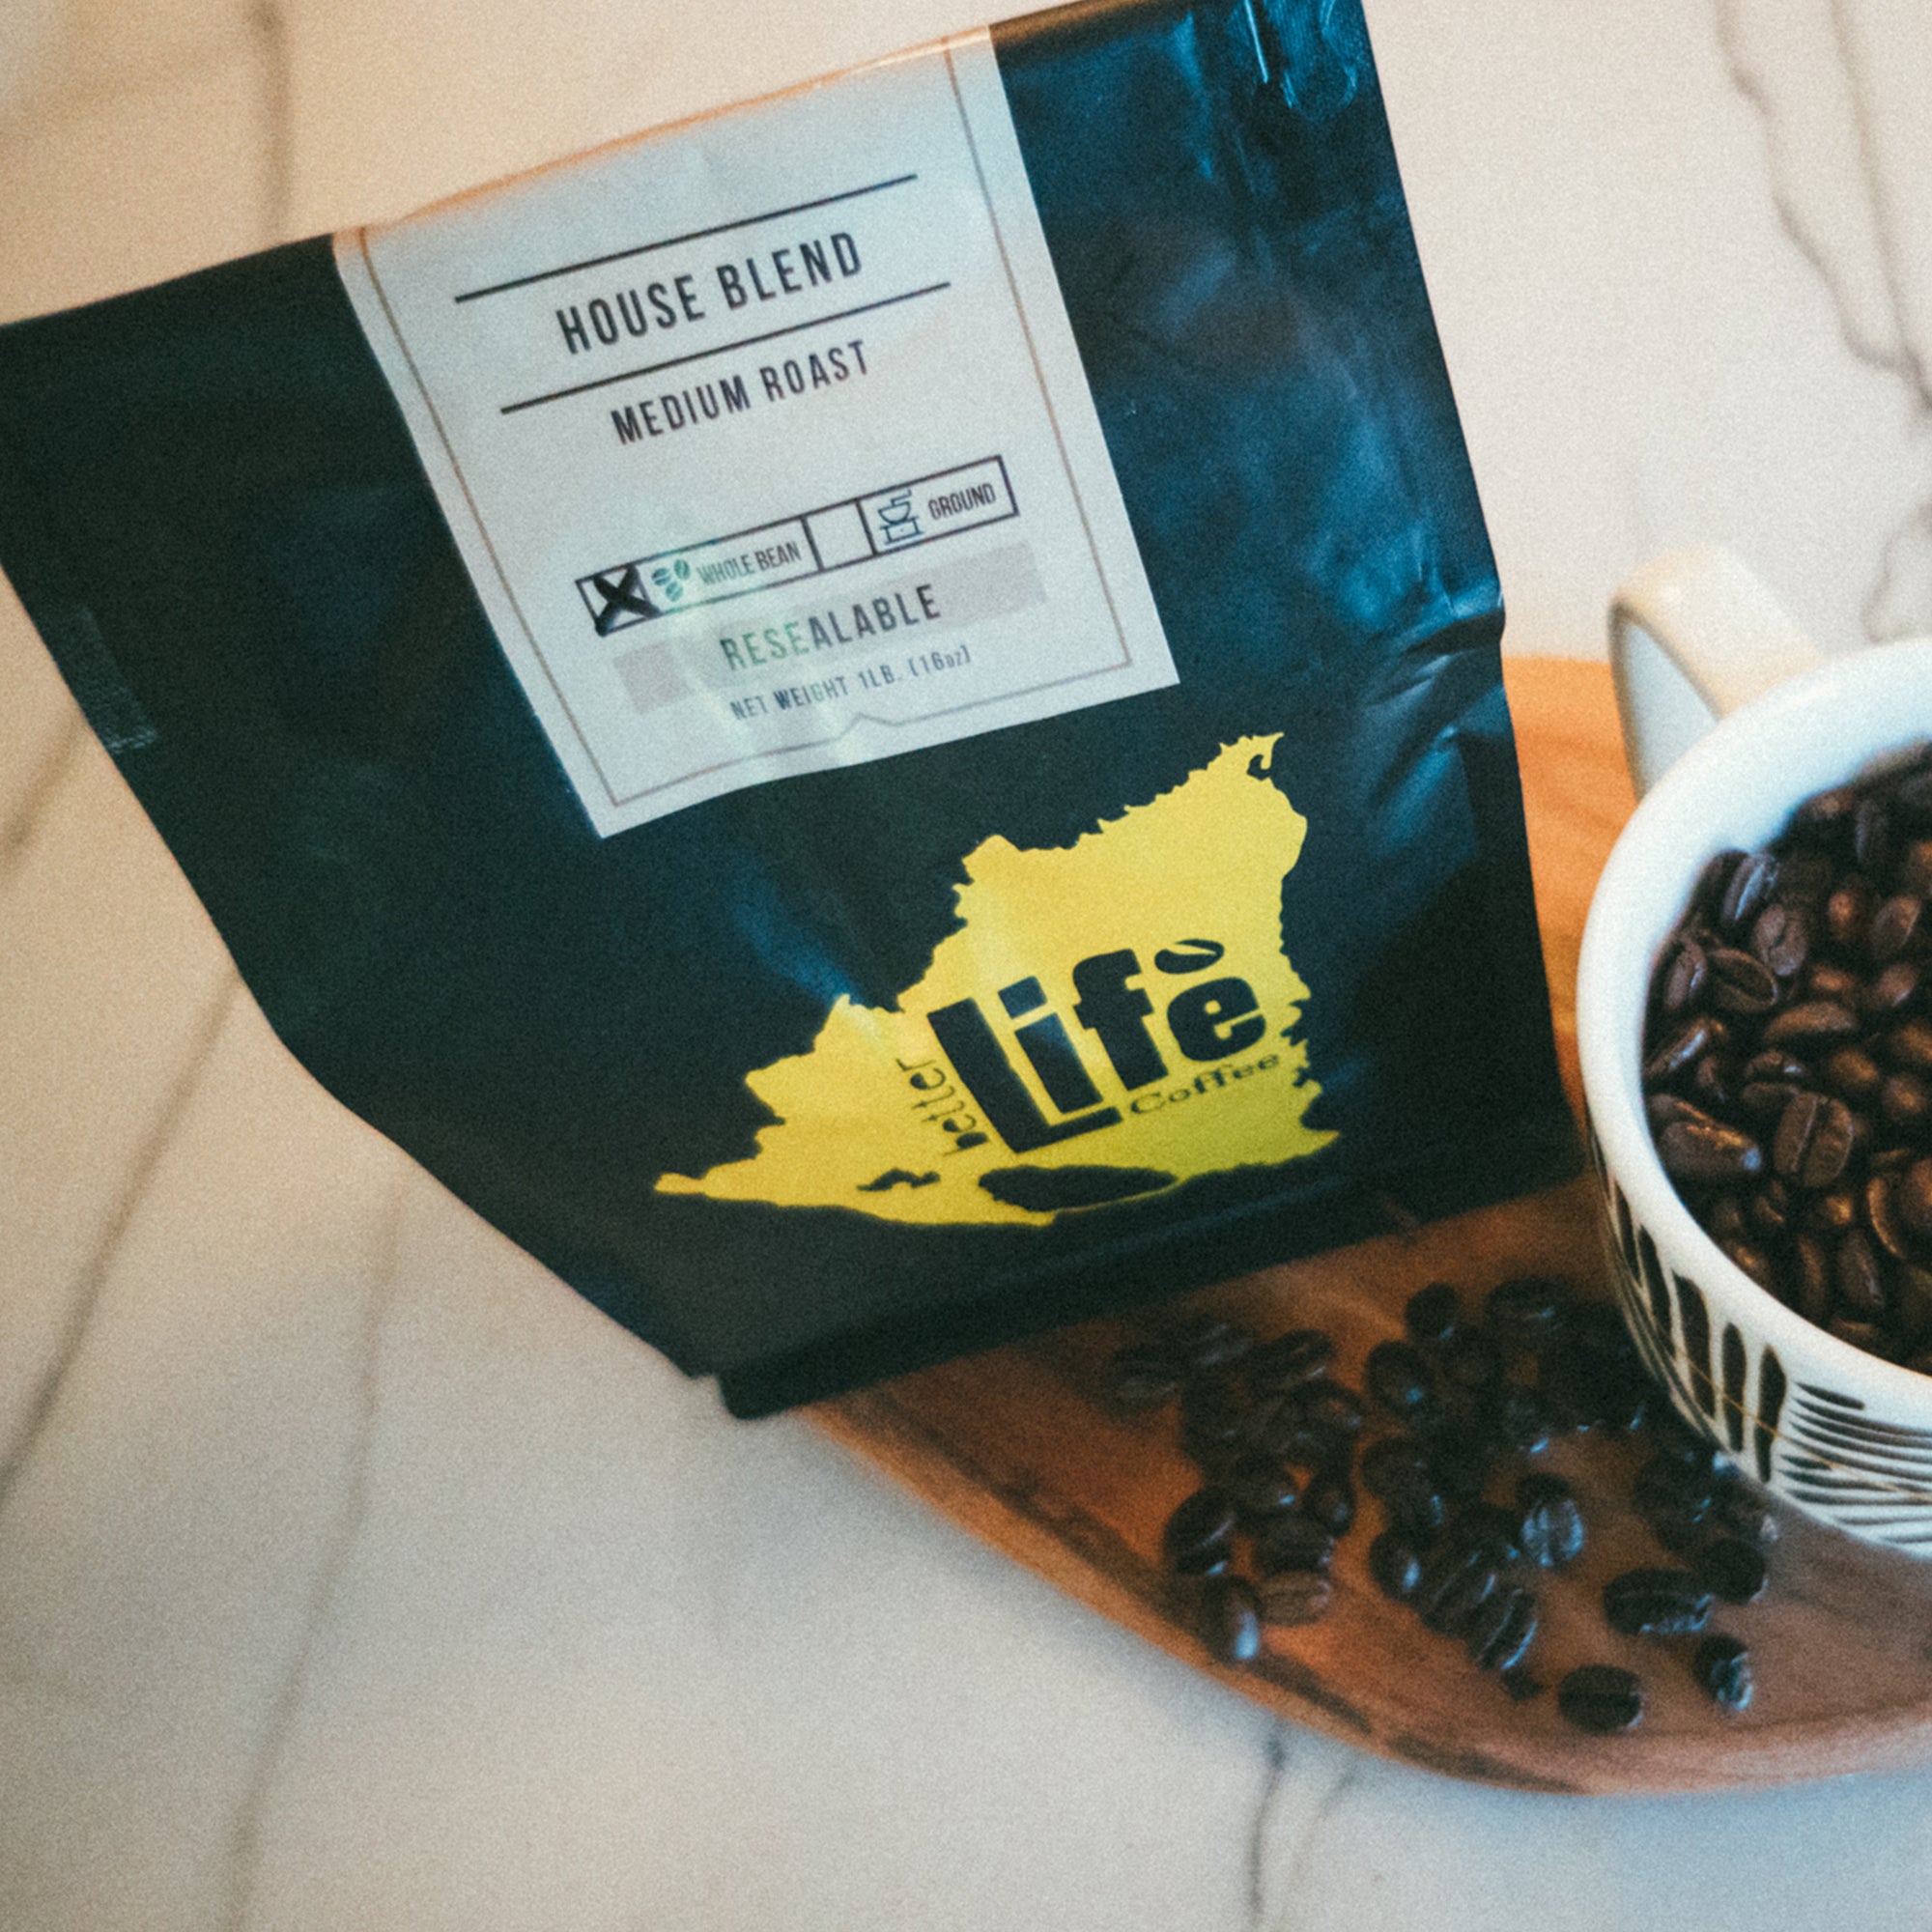 Better Life Coffee House Blend